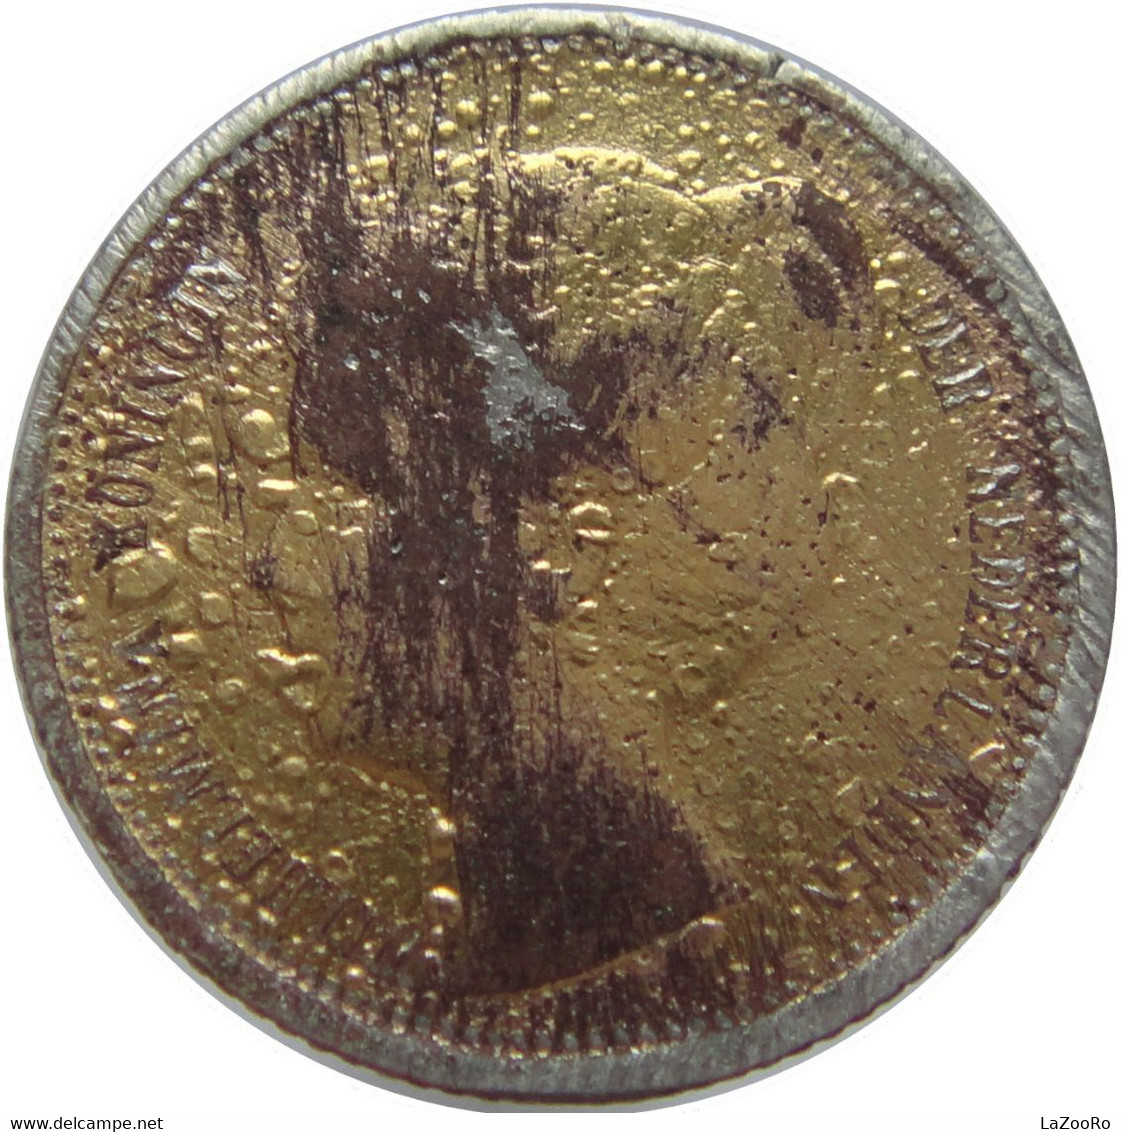 LaZooRo: Curaçao 1/10 Gulden 1901 VF Gold Plated - Silver - Curacao